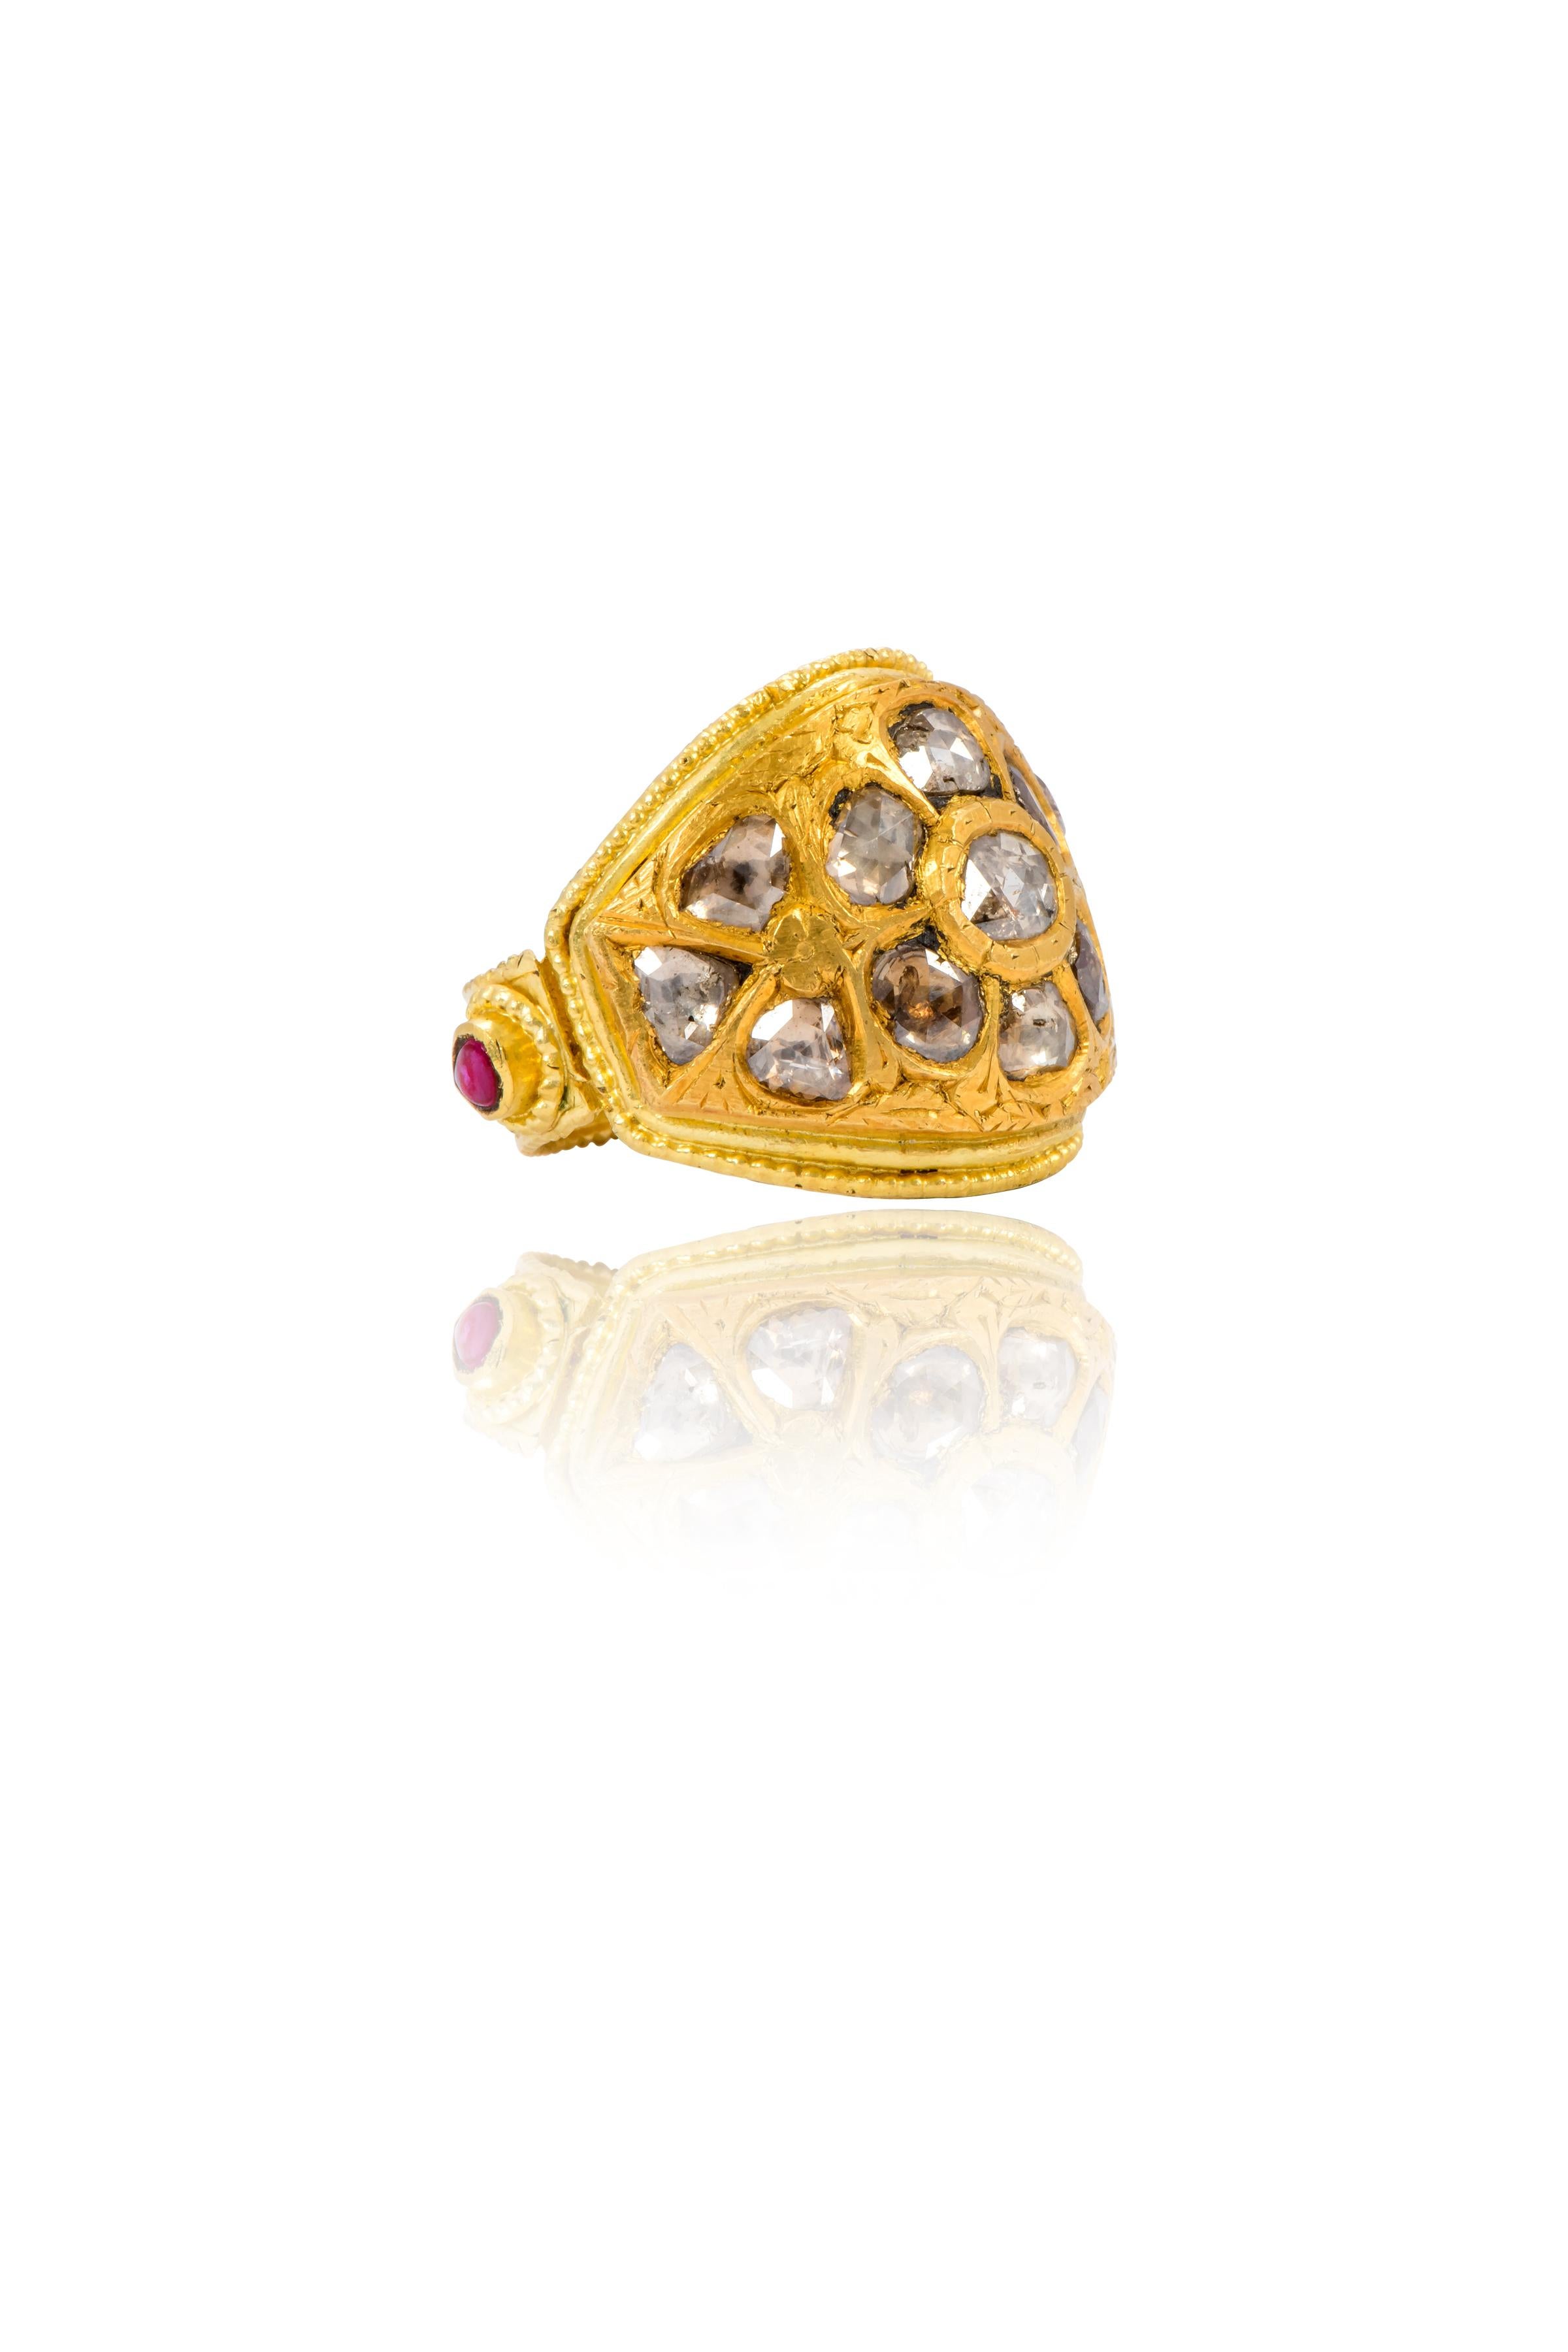 22 Karat Yellow Gold Dome-Shape Diamond and Ruby Statement Ring Handcrafted 

The polki flat cut diamond 22k gold ring handcrafted with sophisticated gold work on the edges and around give it a unique new perspective as a traditional ring. It‘s